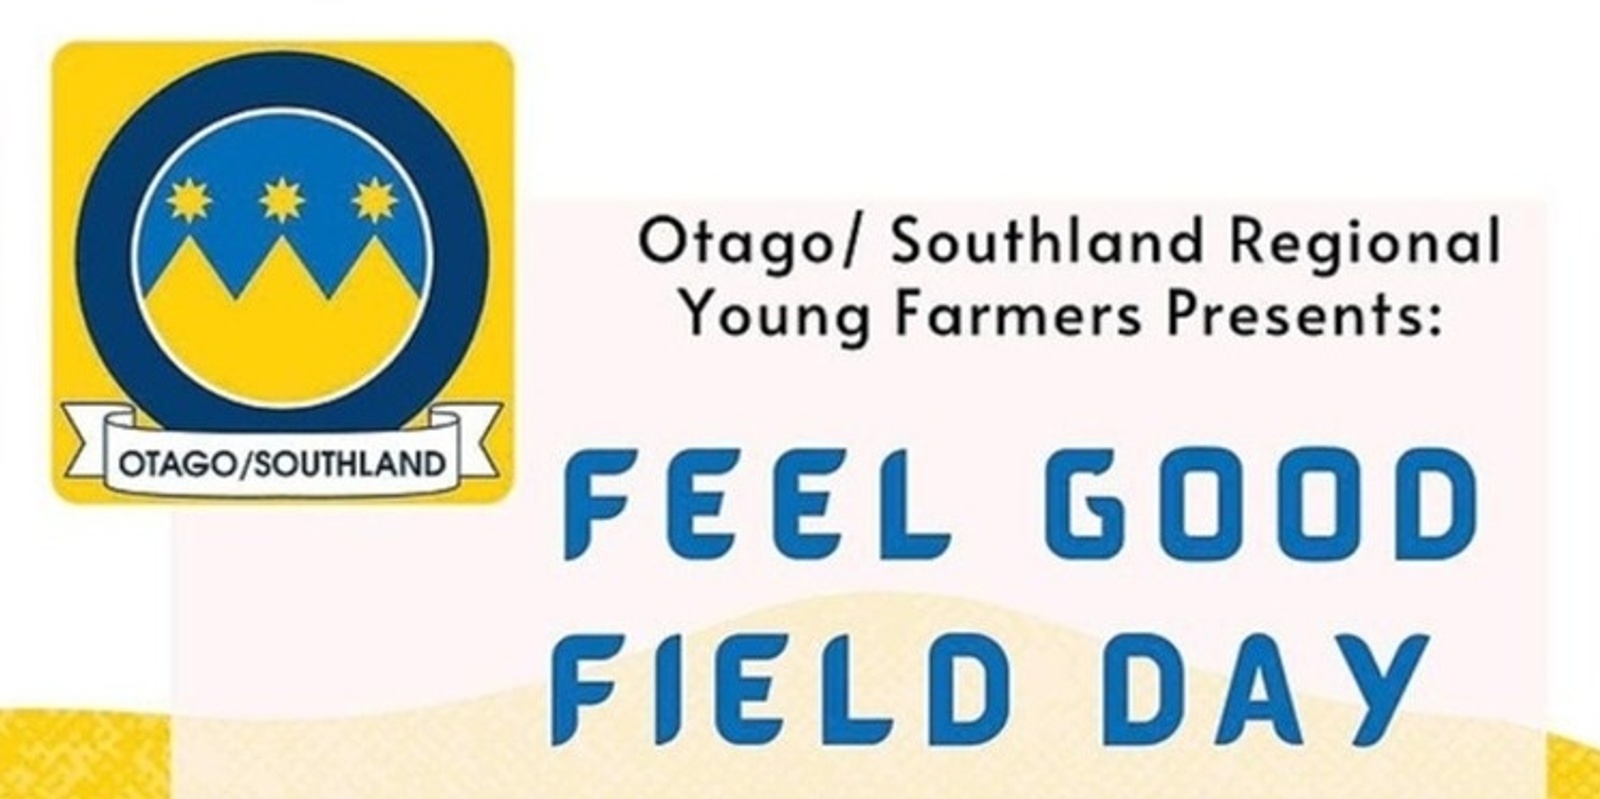 Banner image for Feel Good Field Day